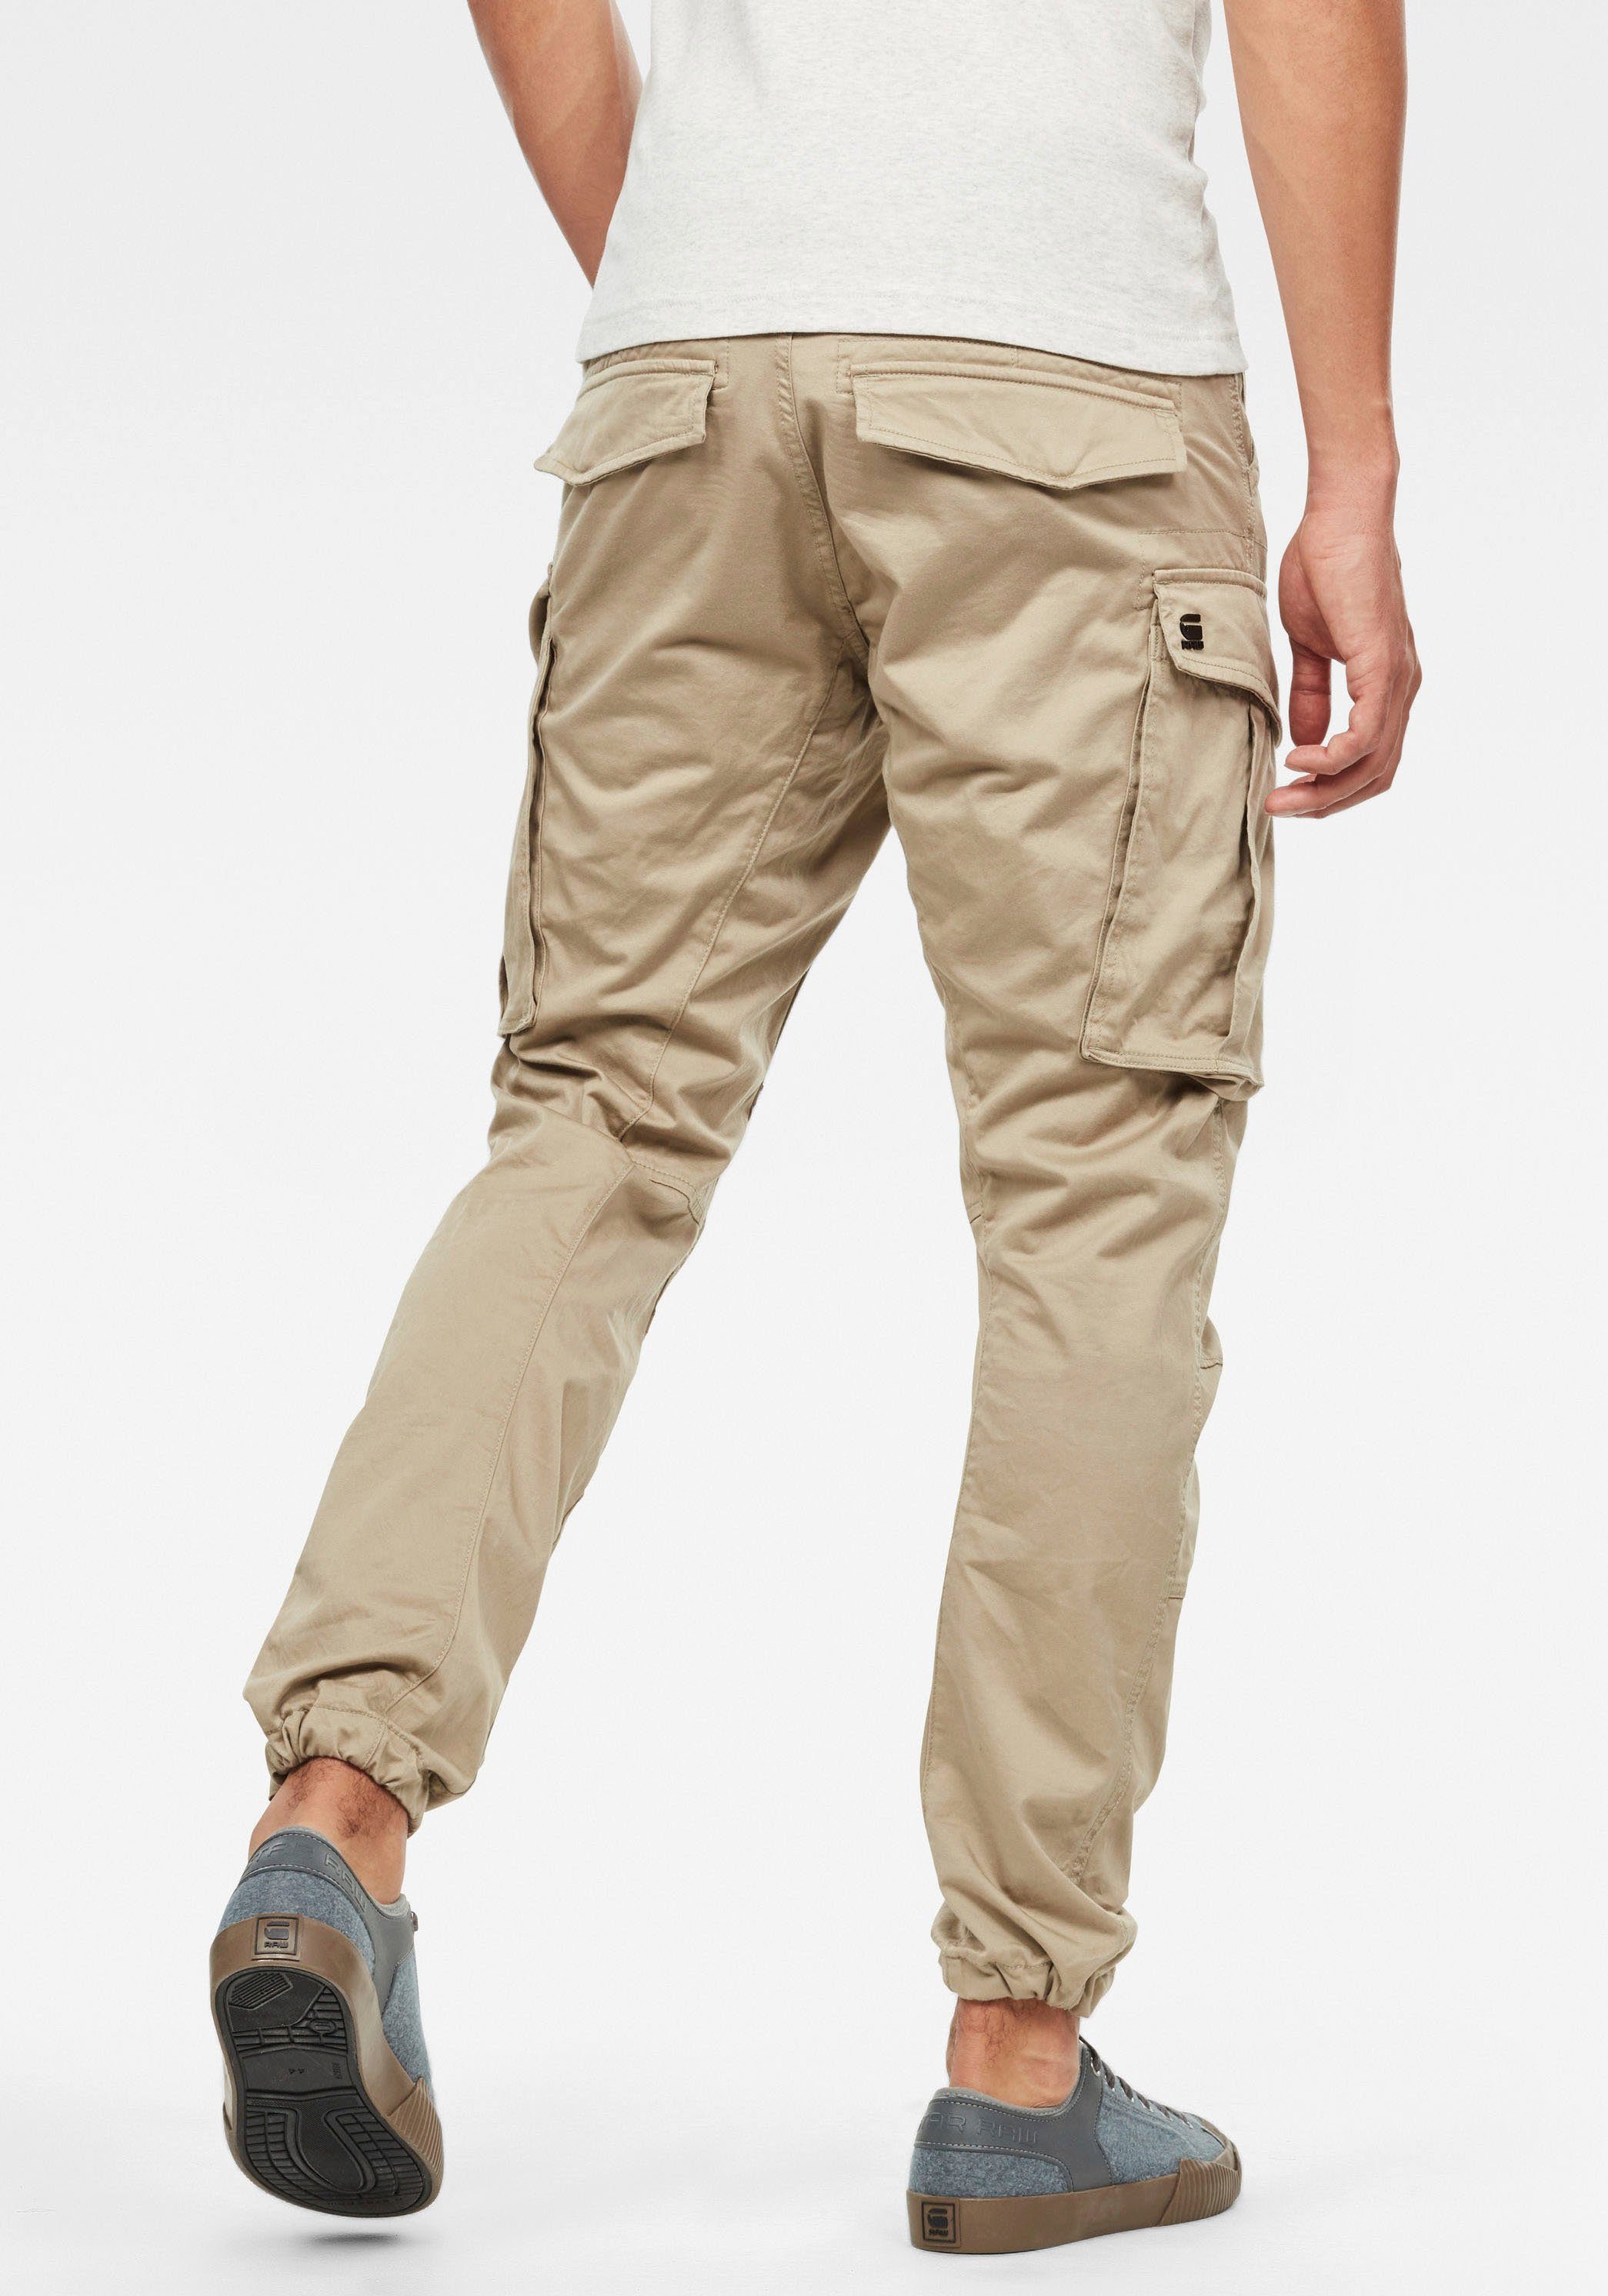 Rovic Cargohose beige G-Star Zip RAW Tapered Pant 3D